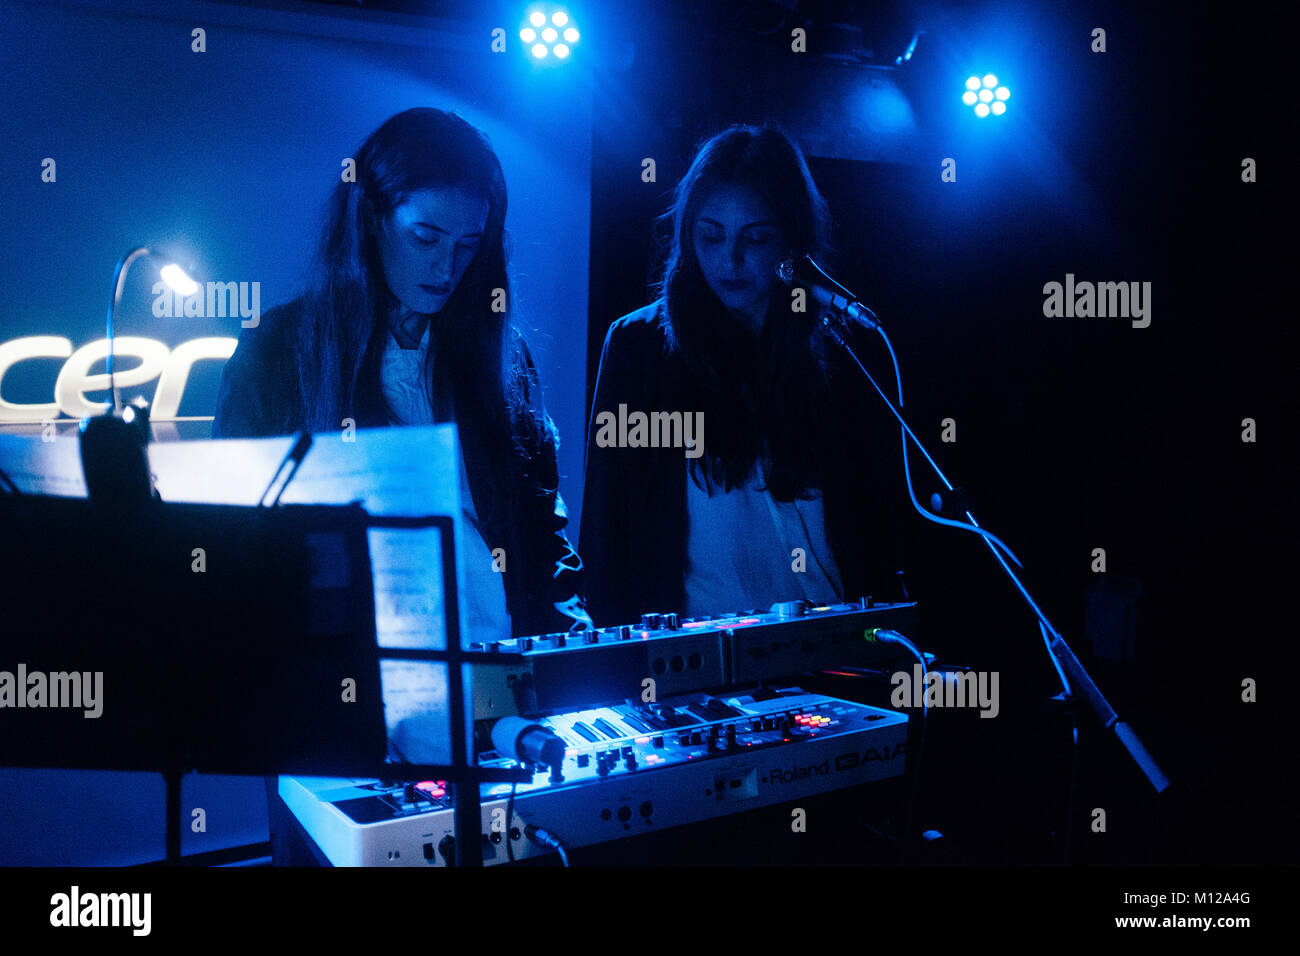 The American musical project Tropic of Cancer performs a live concert at Huset during the Danish music festival Frost Festival 2017 in Copenhagen. Here singer, songwriter and musician Camella Lobo (R) is seen live on stage with musician Taylor Burch (L). Denmark, 23/02 2017. Stock Photo